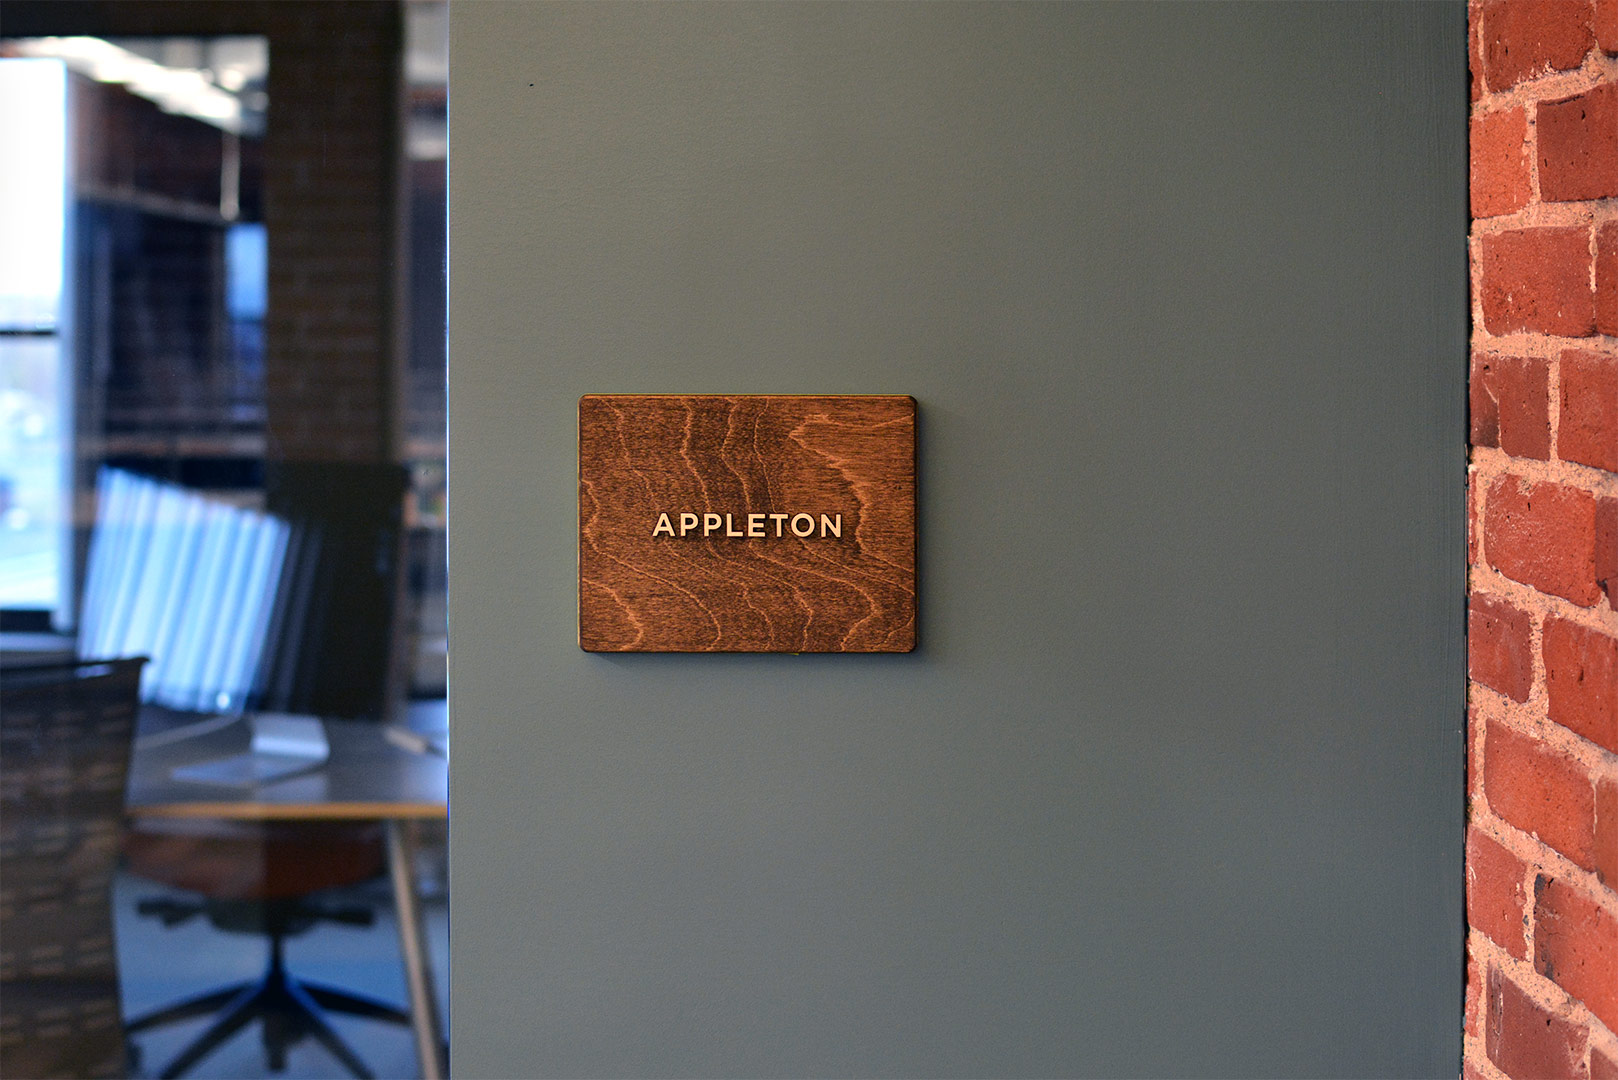 Architectural room identifying sign for a room named Appleton, made out of stained wood, installed on slate colored drywall with exposed brick and glass walls showing at the edges.